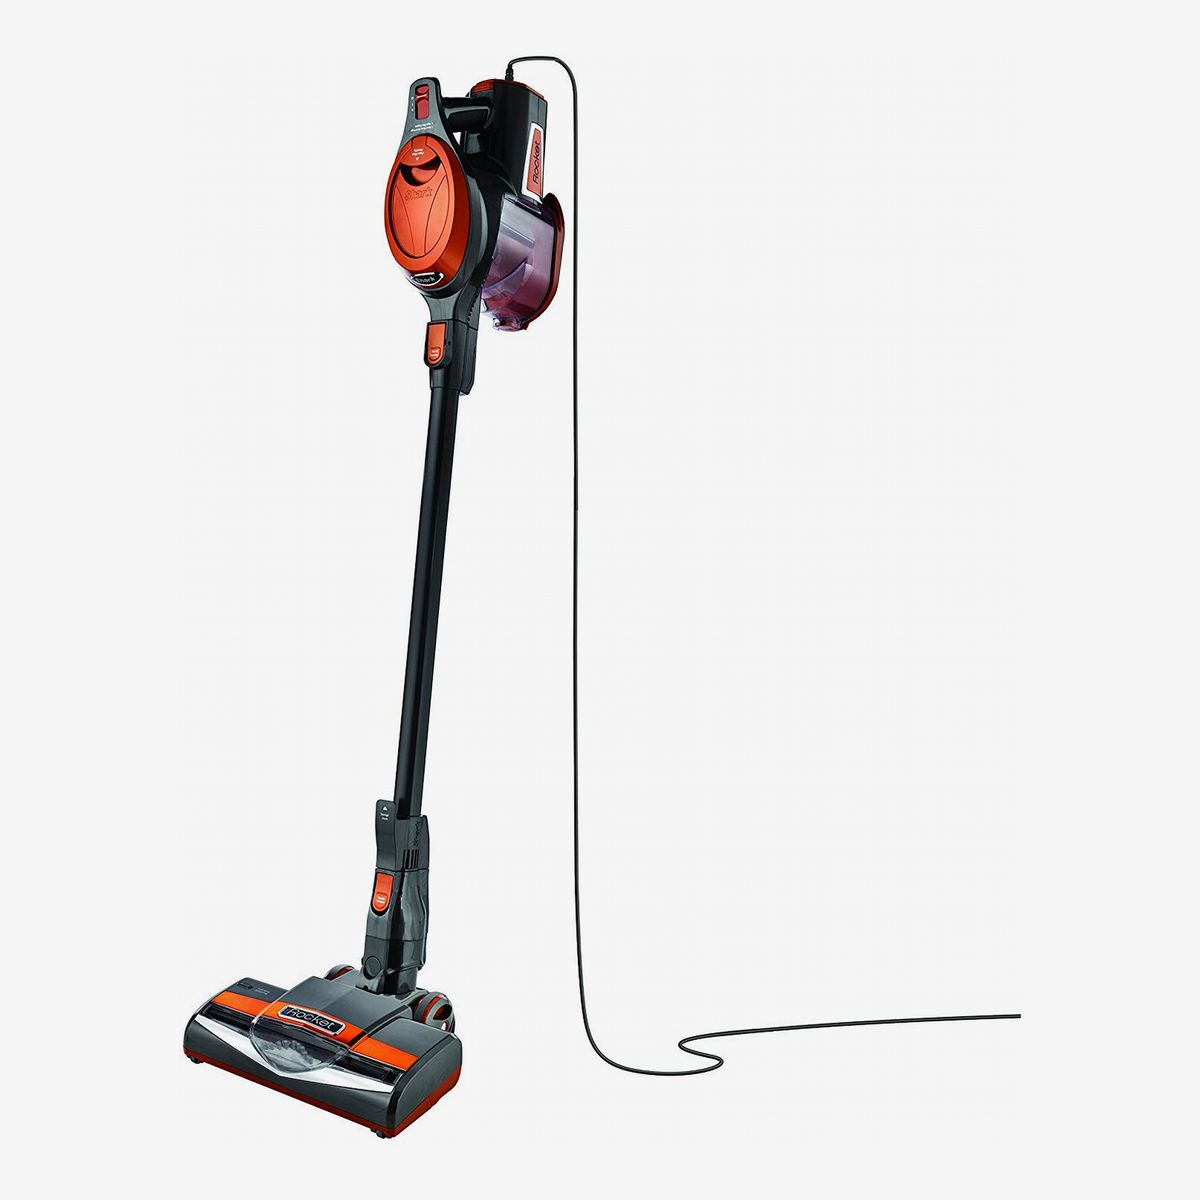 18 Best Vacuums For Pet Hair 2022 The, Best Pet Vacuum For Hardwood Floors And Carpet